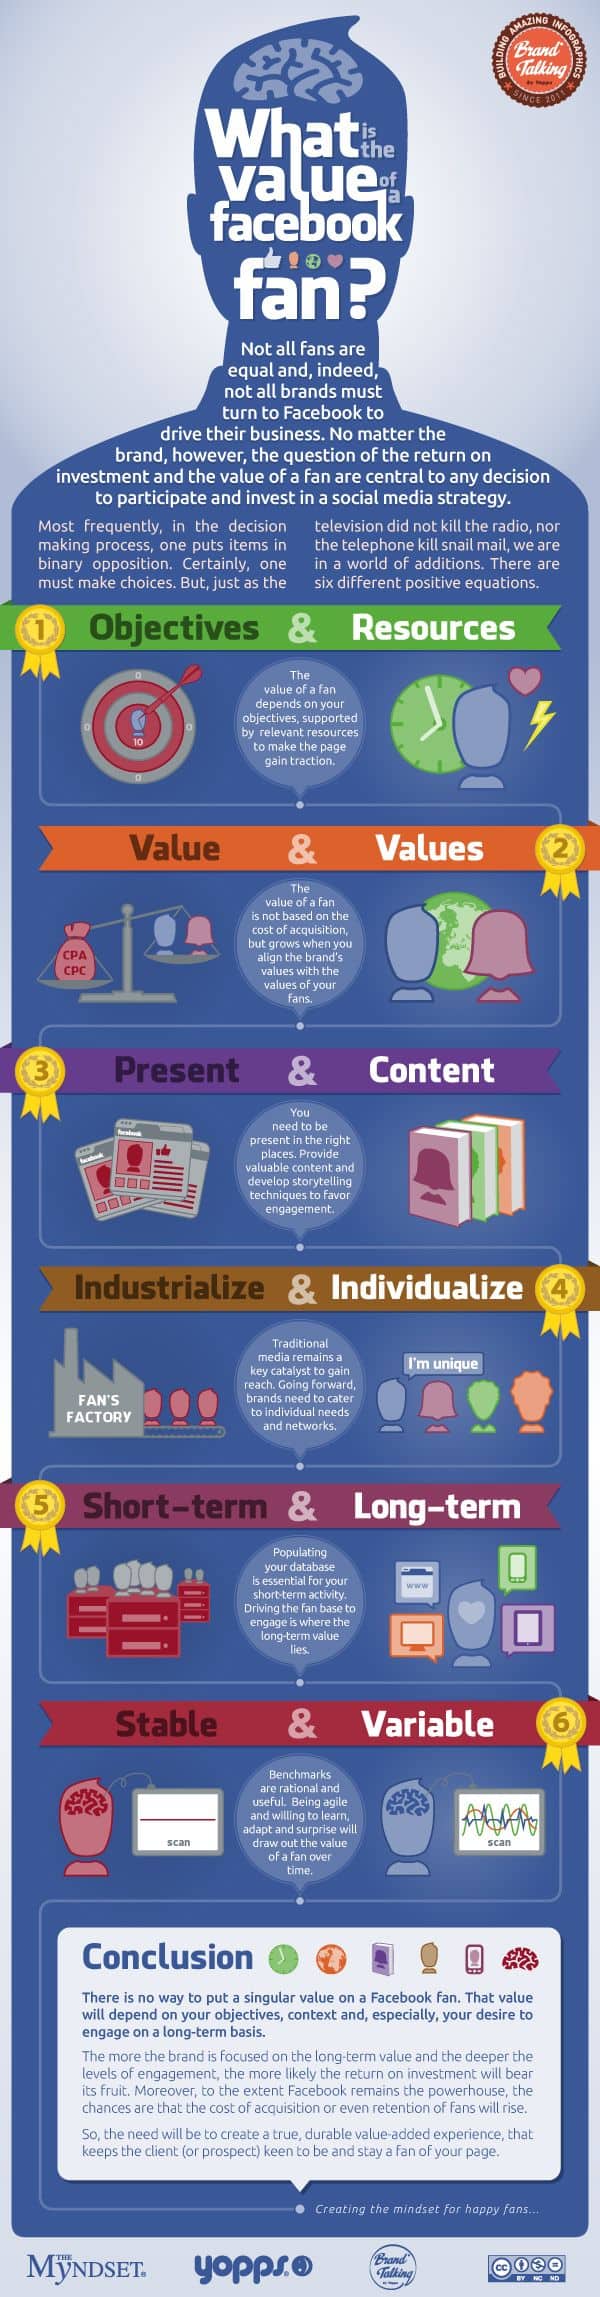 How to value a Facebook fan - infographic